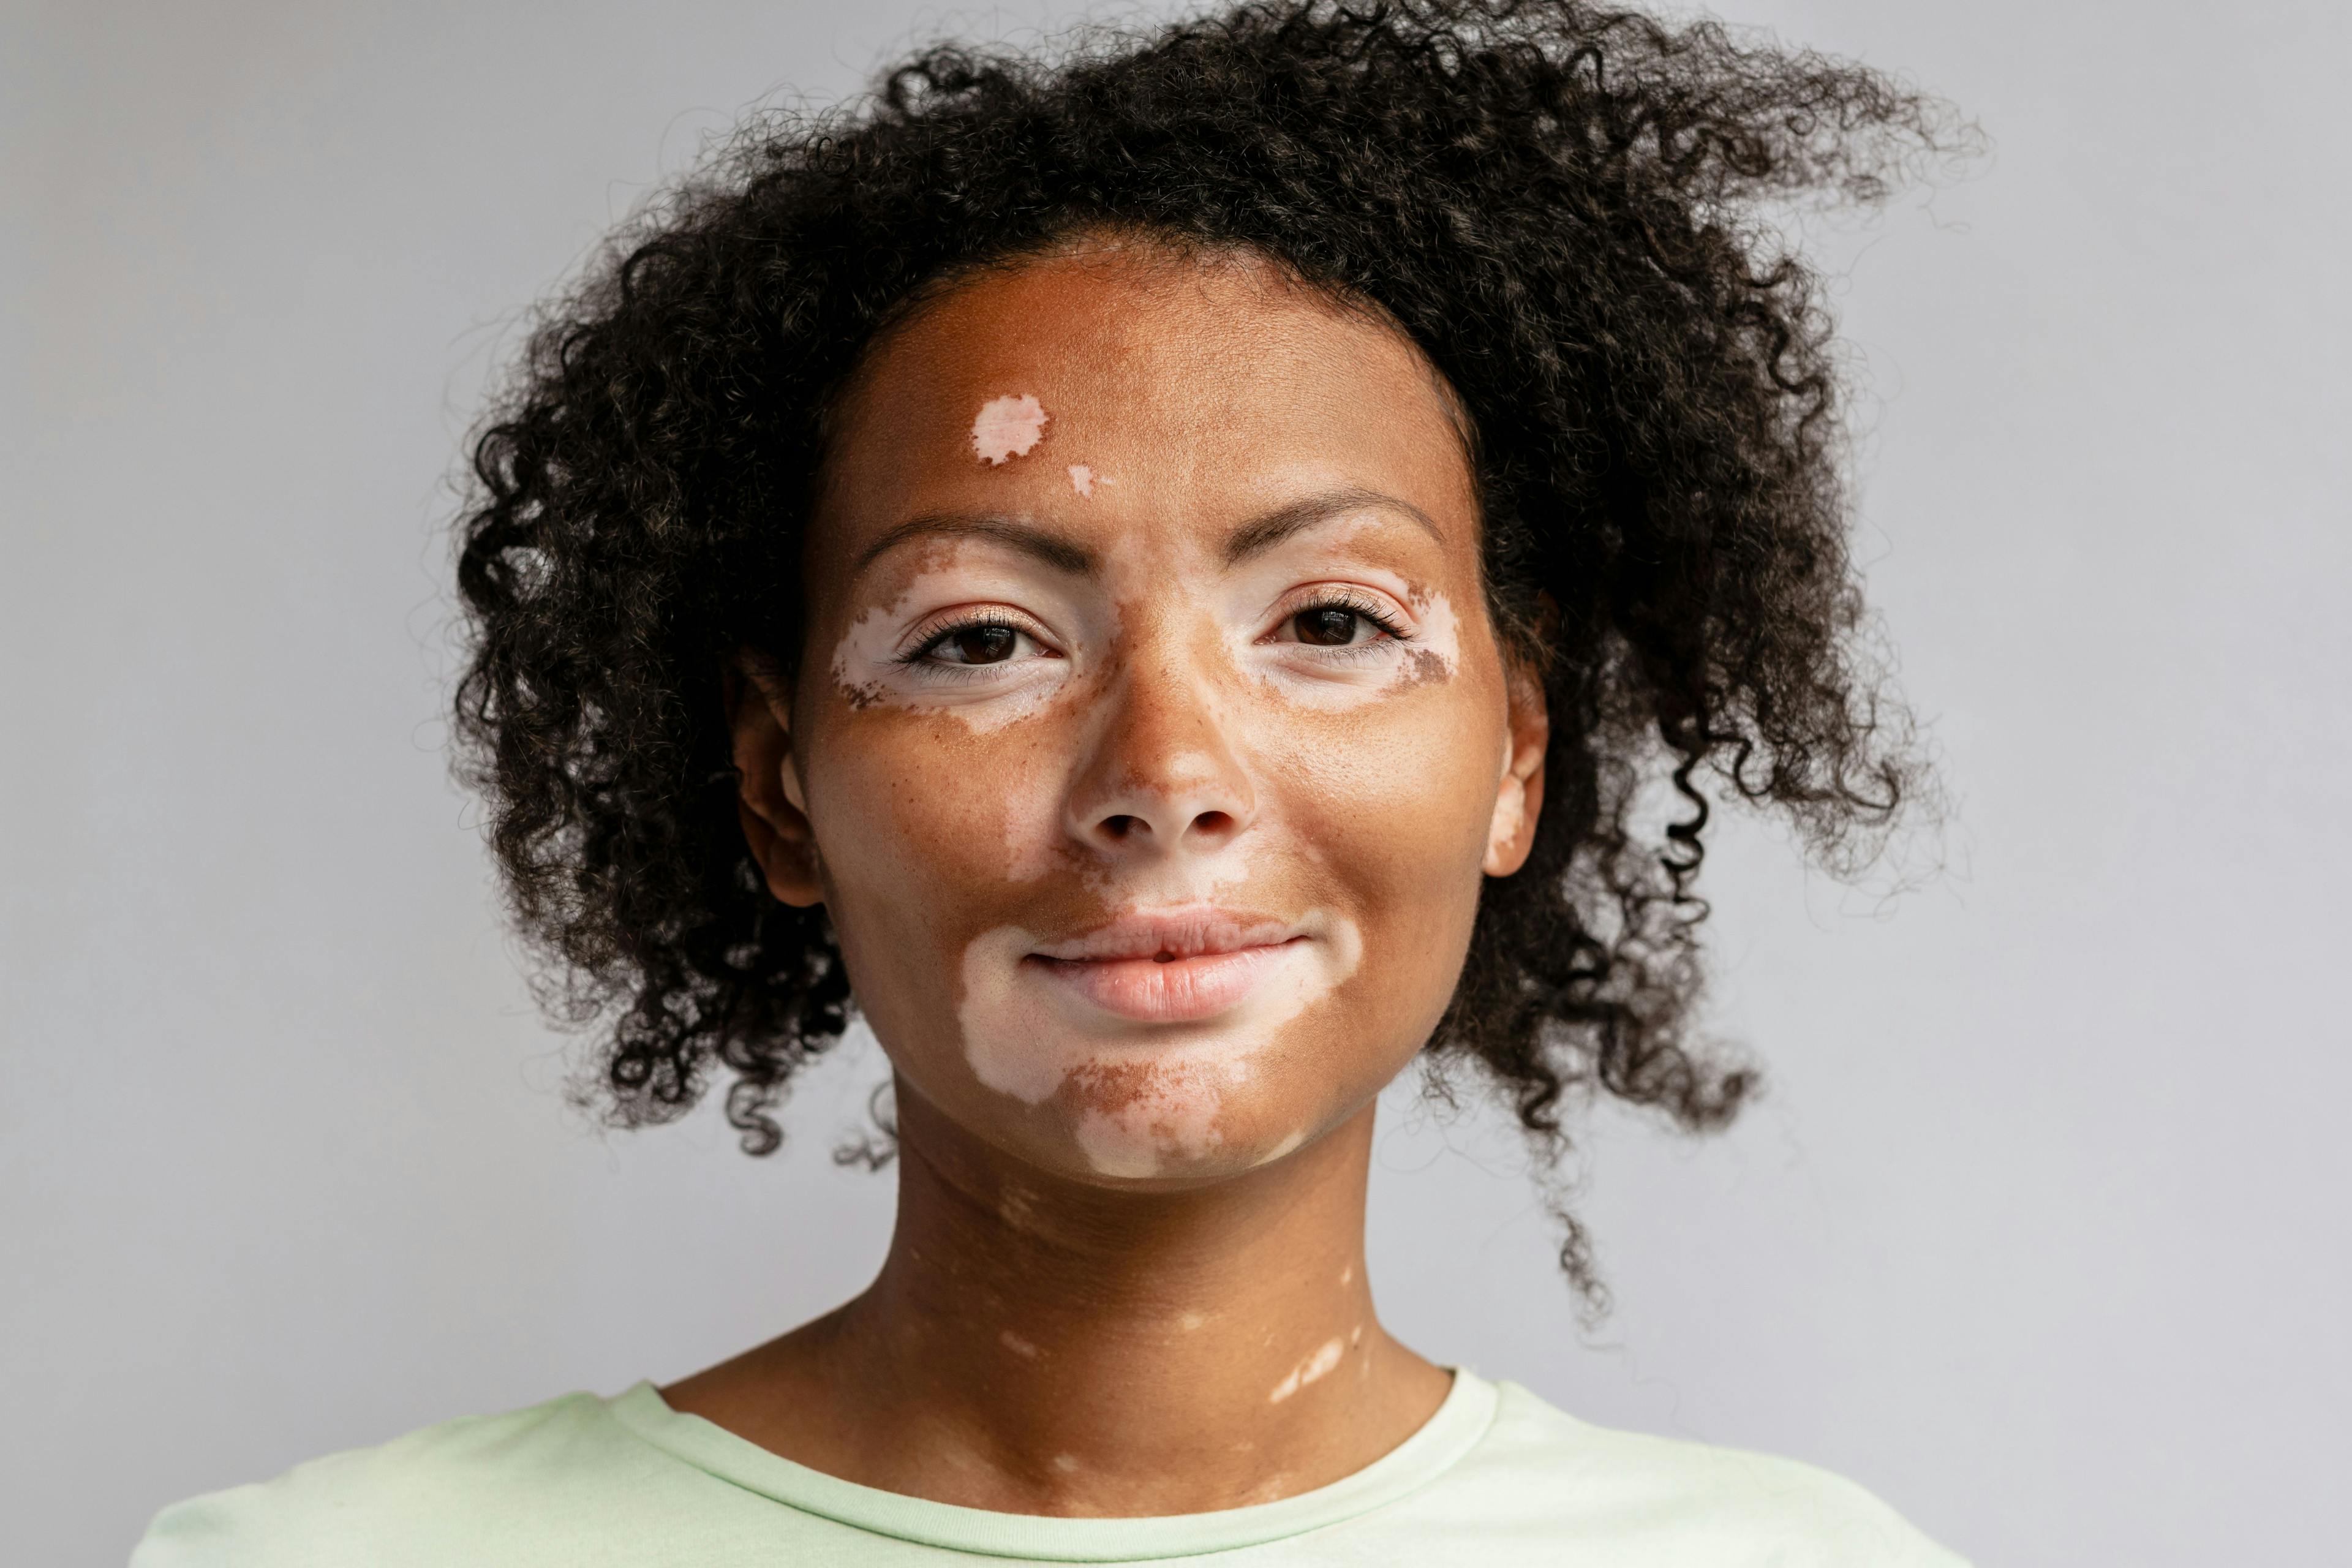 Microneedling Combined with Other Vitiligo Therapies Offers Promising Treatment for Skin Disease